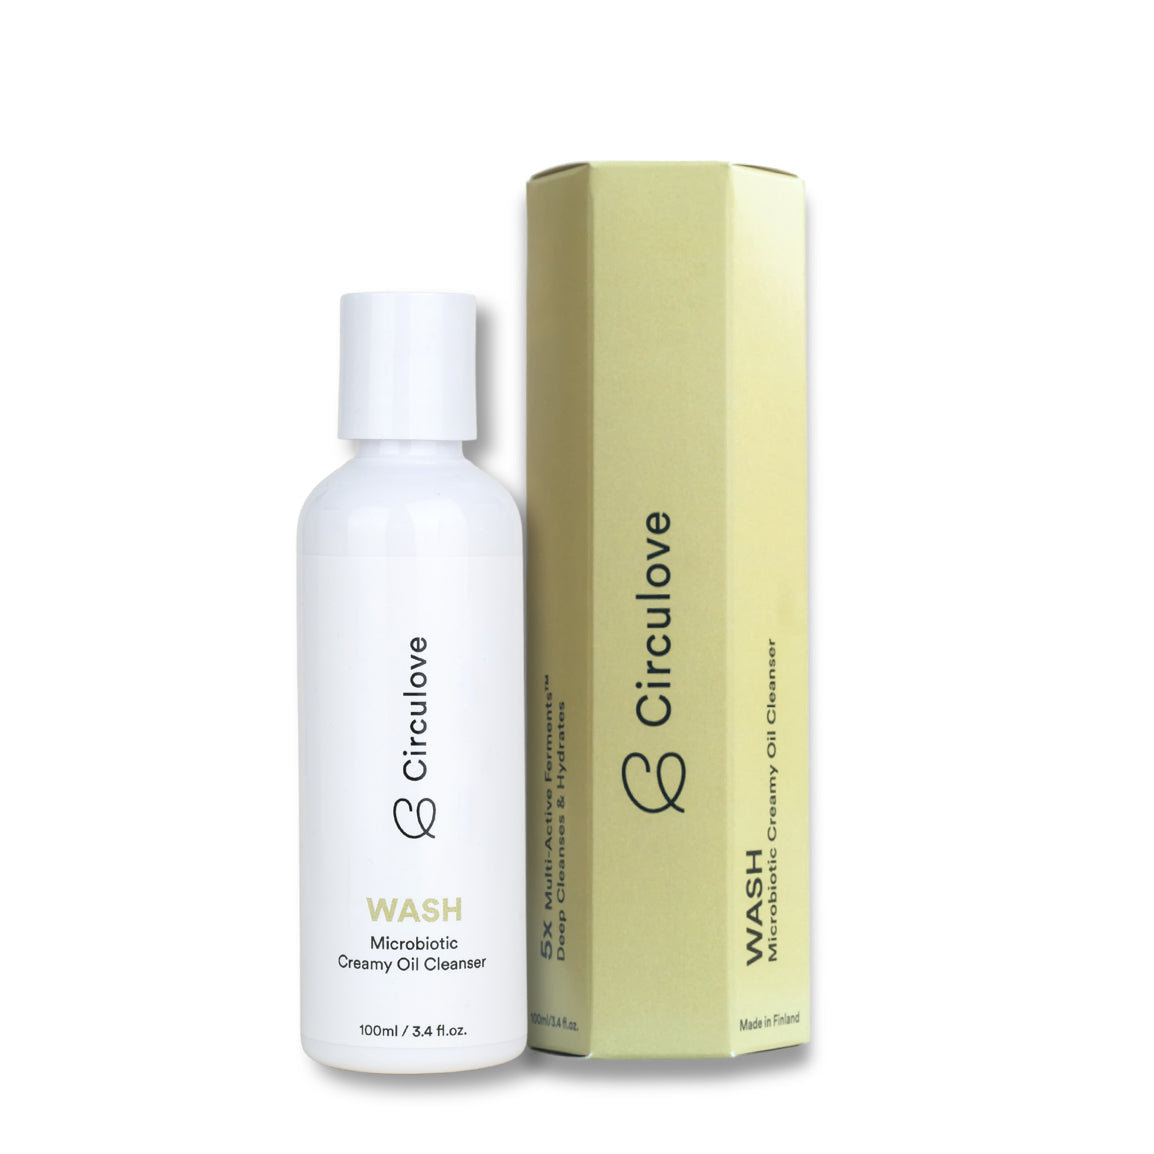 WASH | Conditioning Microbiotic Creamy Oil Cleanser